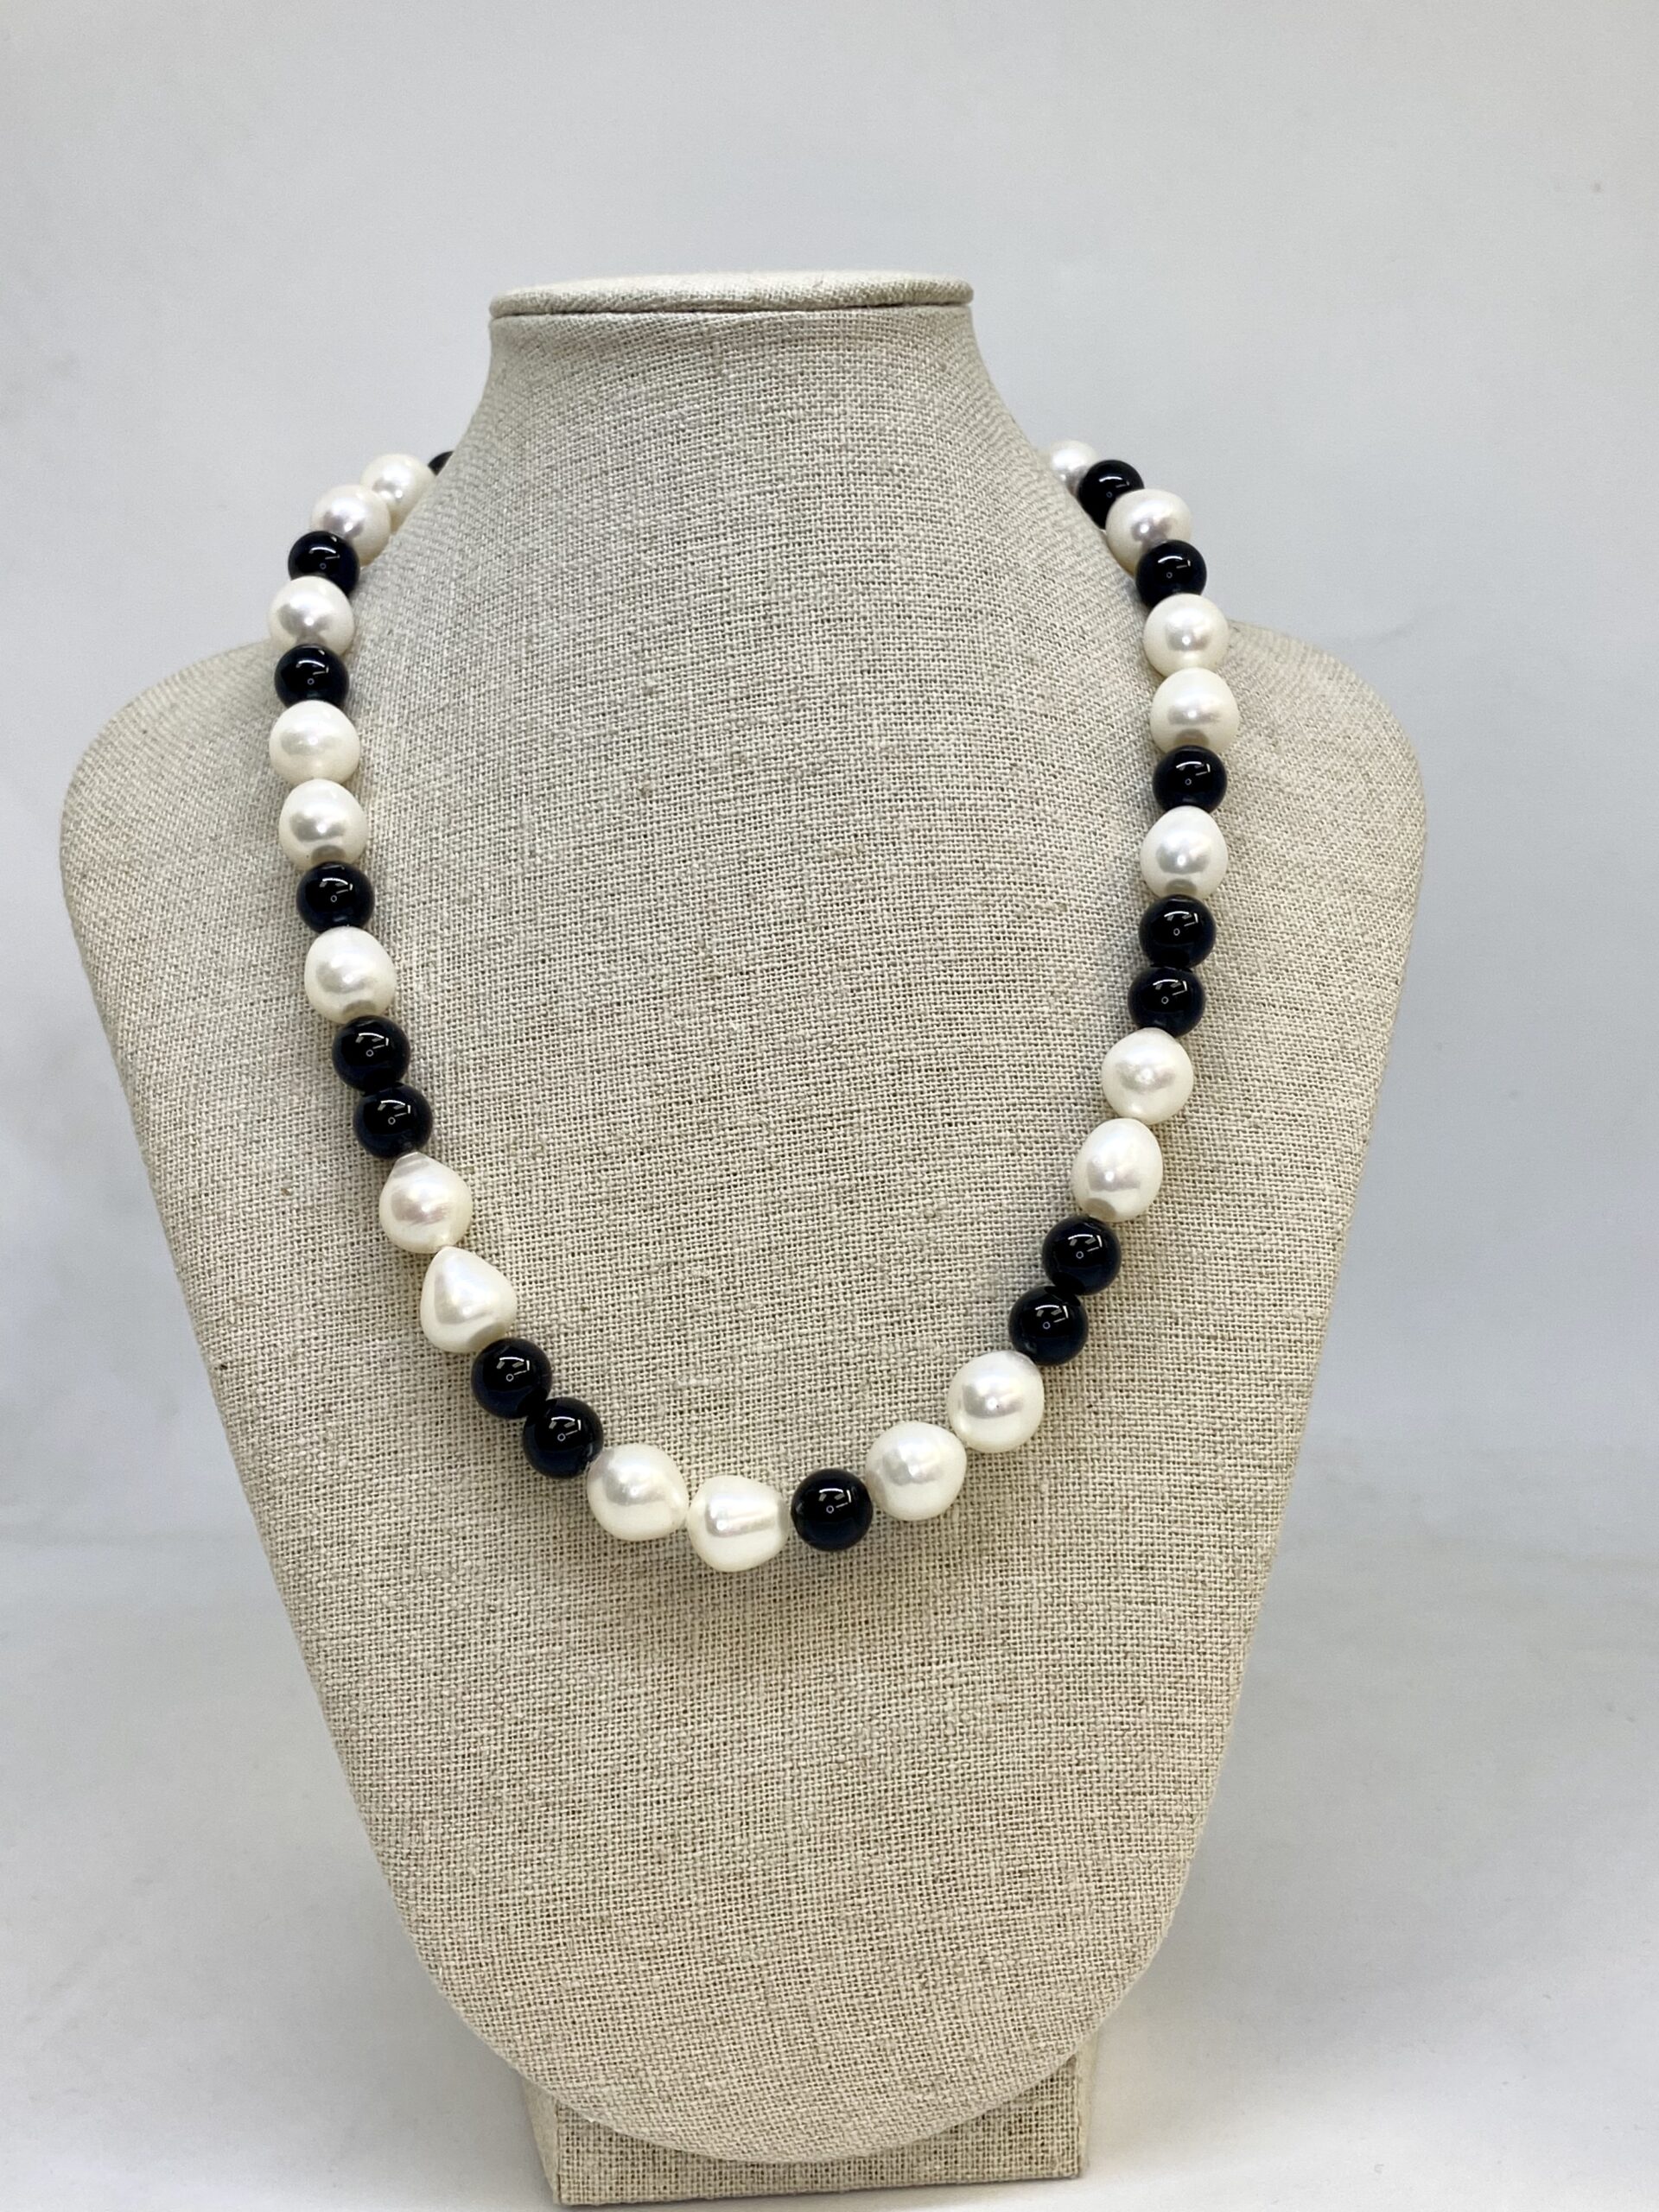 Onyx and Pearl Necklace With 14K Gold Accents - Etsy